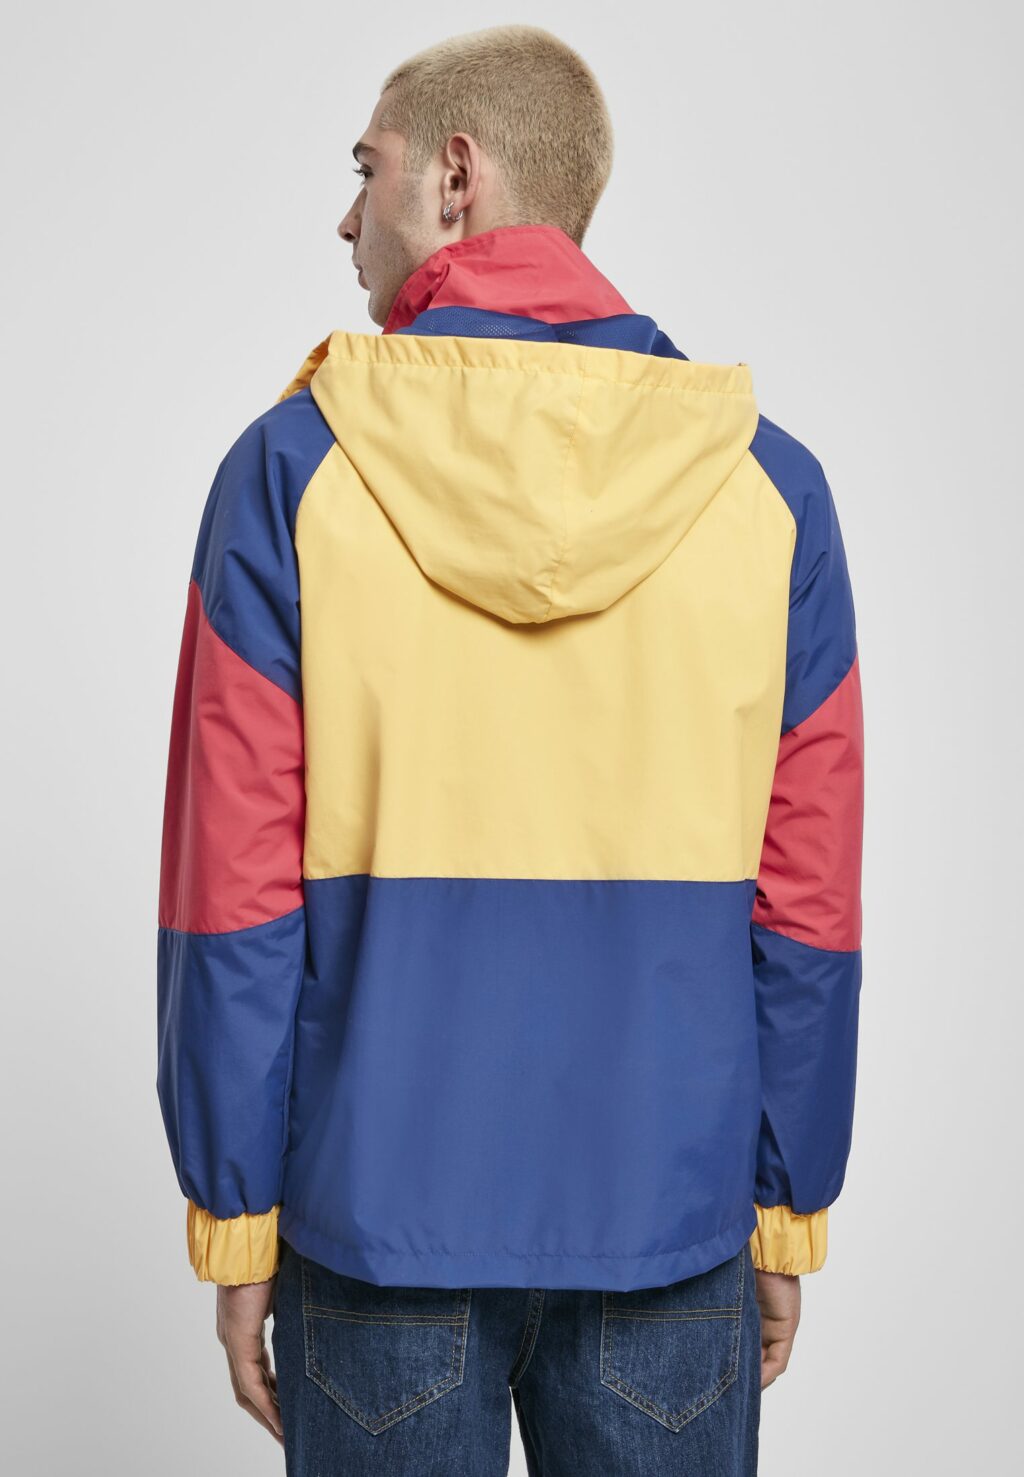 Starter Multicolored Logo Jacket red/blue/yellow ST029